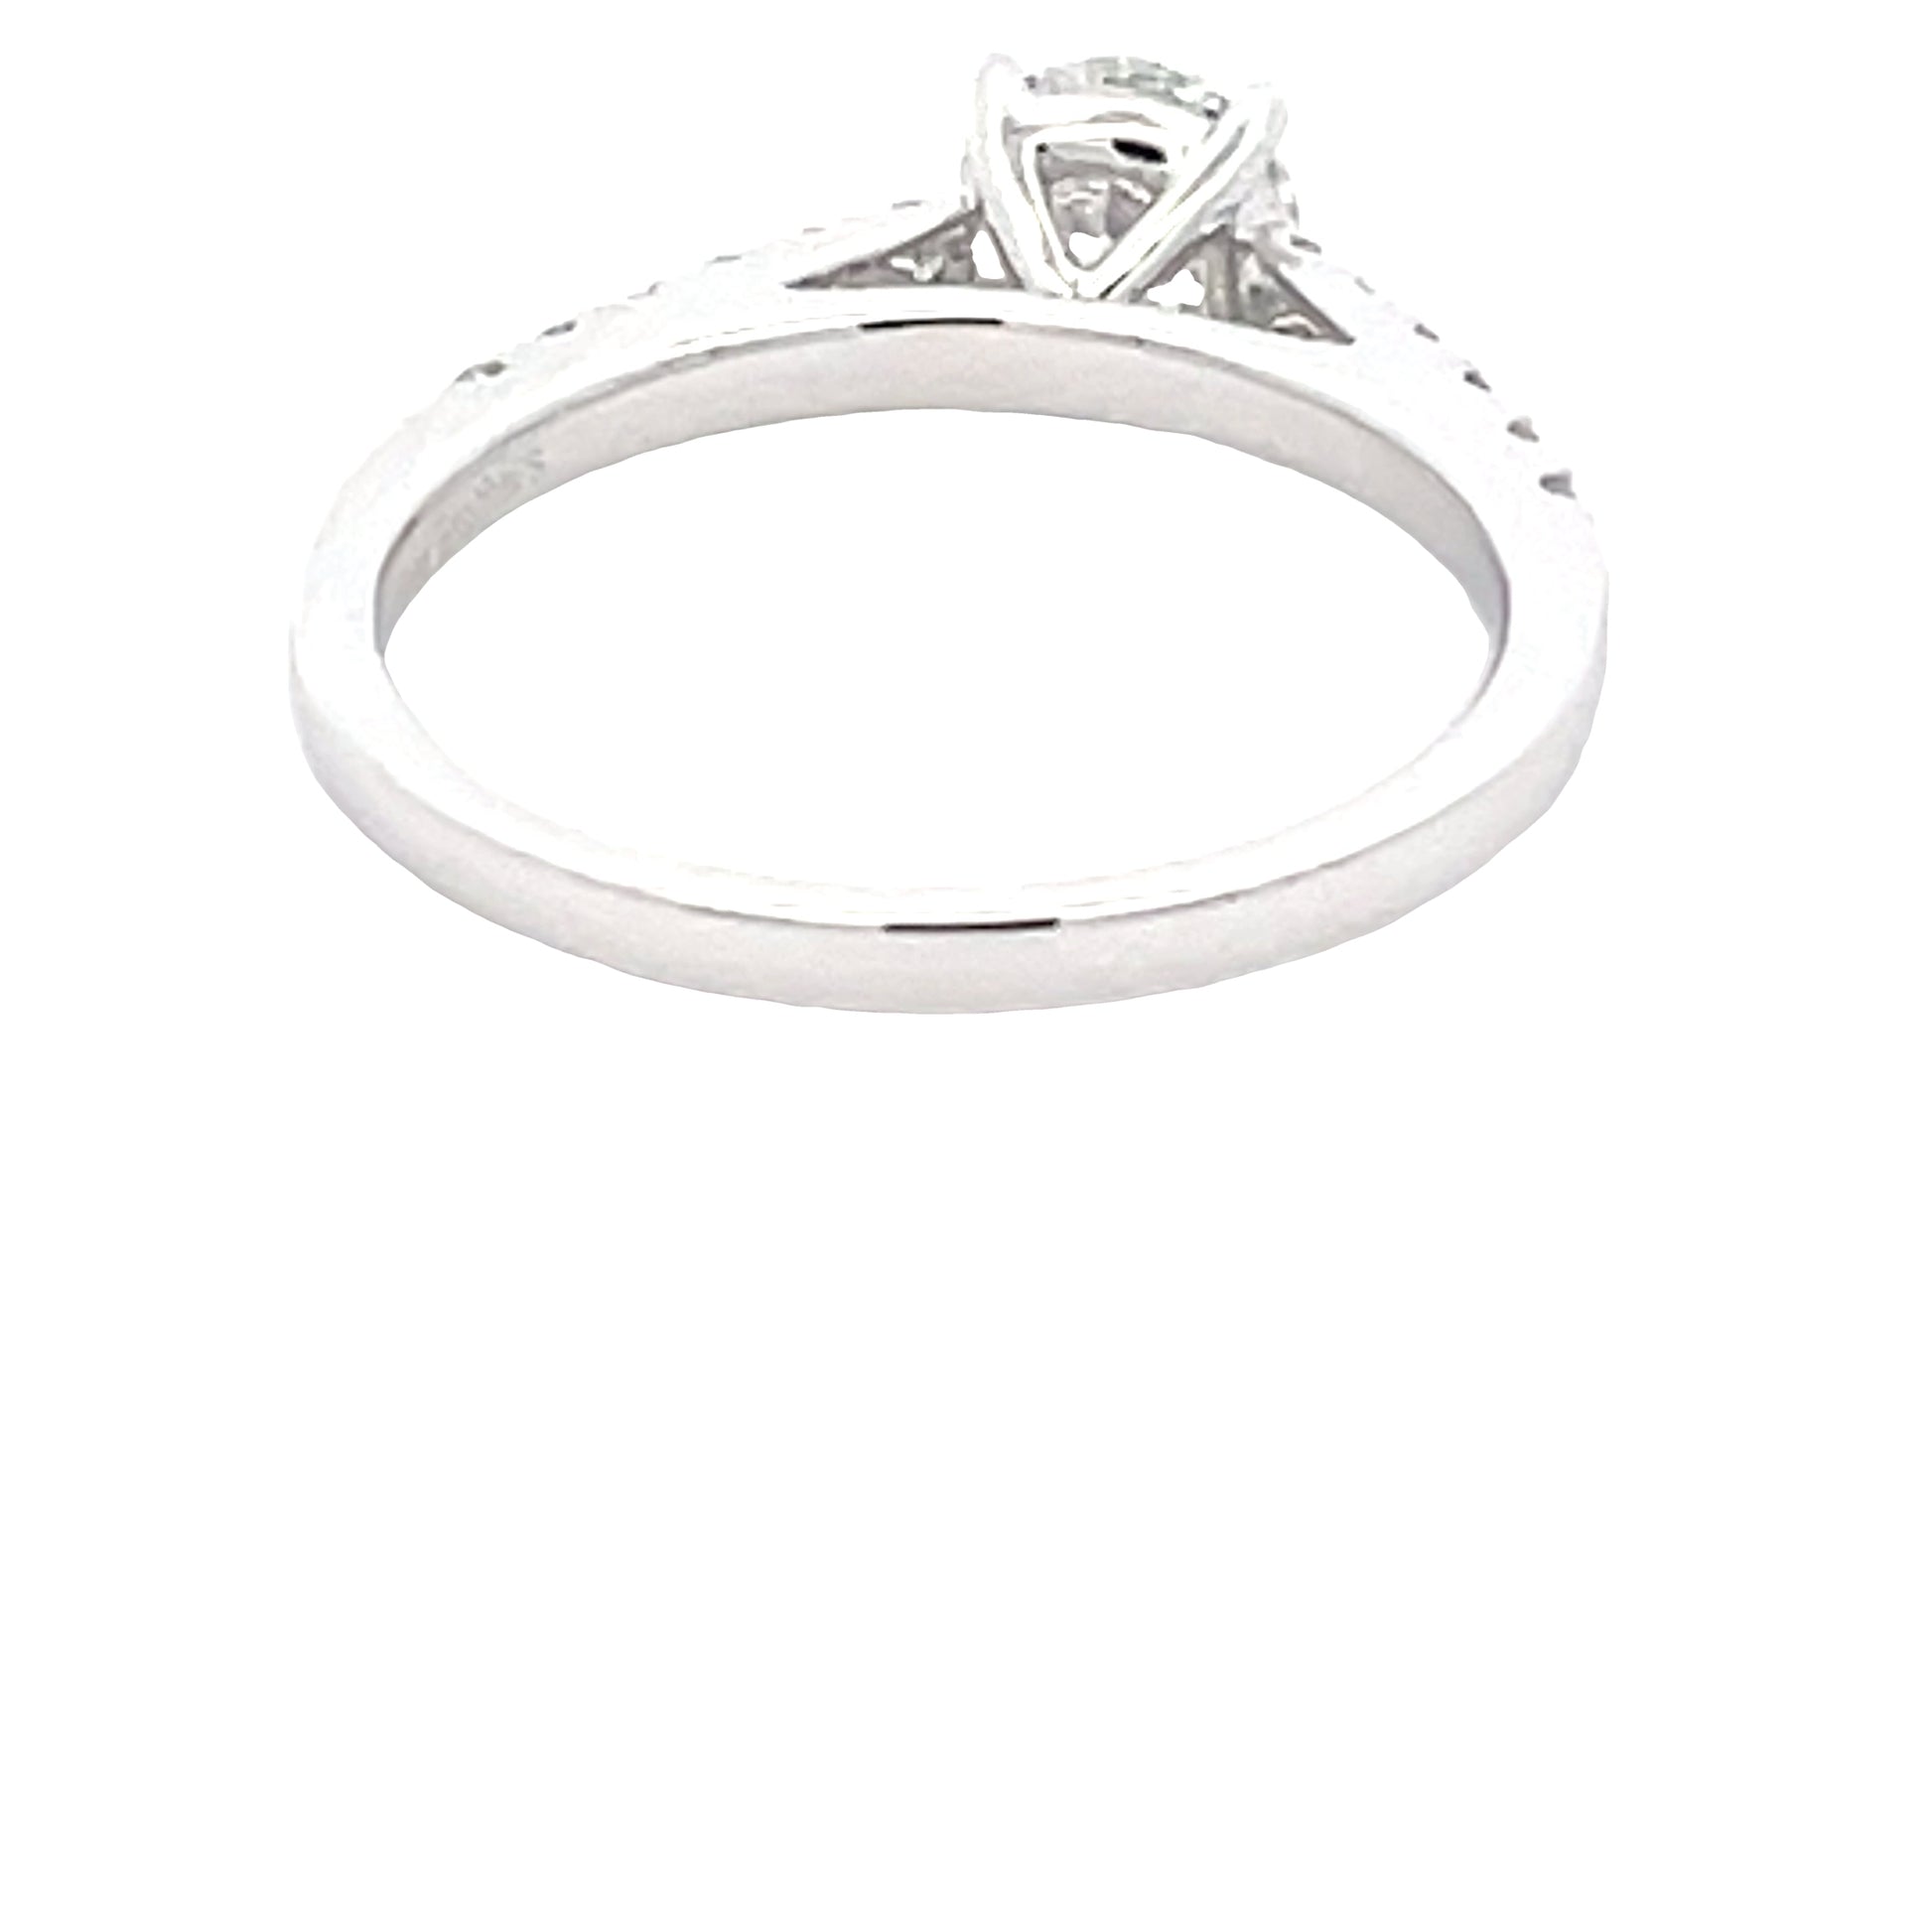 Lab Grown Round brilliant Cut Diamond Solitaire Ring with Diamond Set shoulders - 0.96cts  Gardiner Brothers   